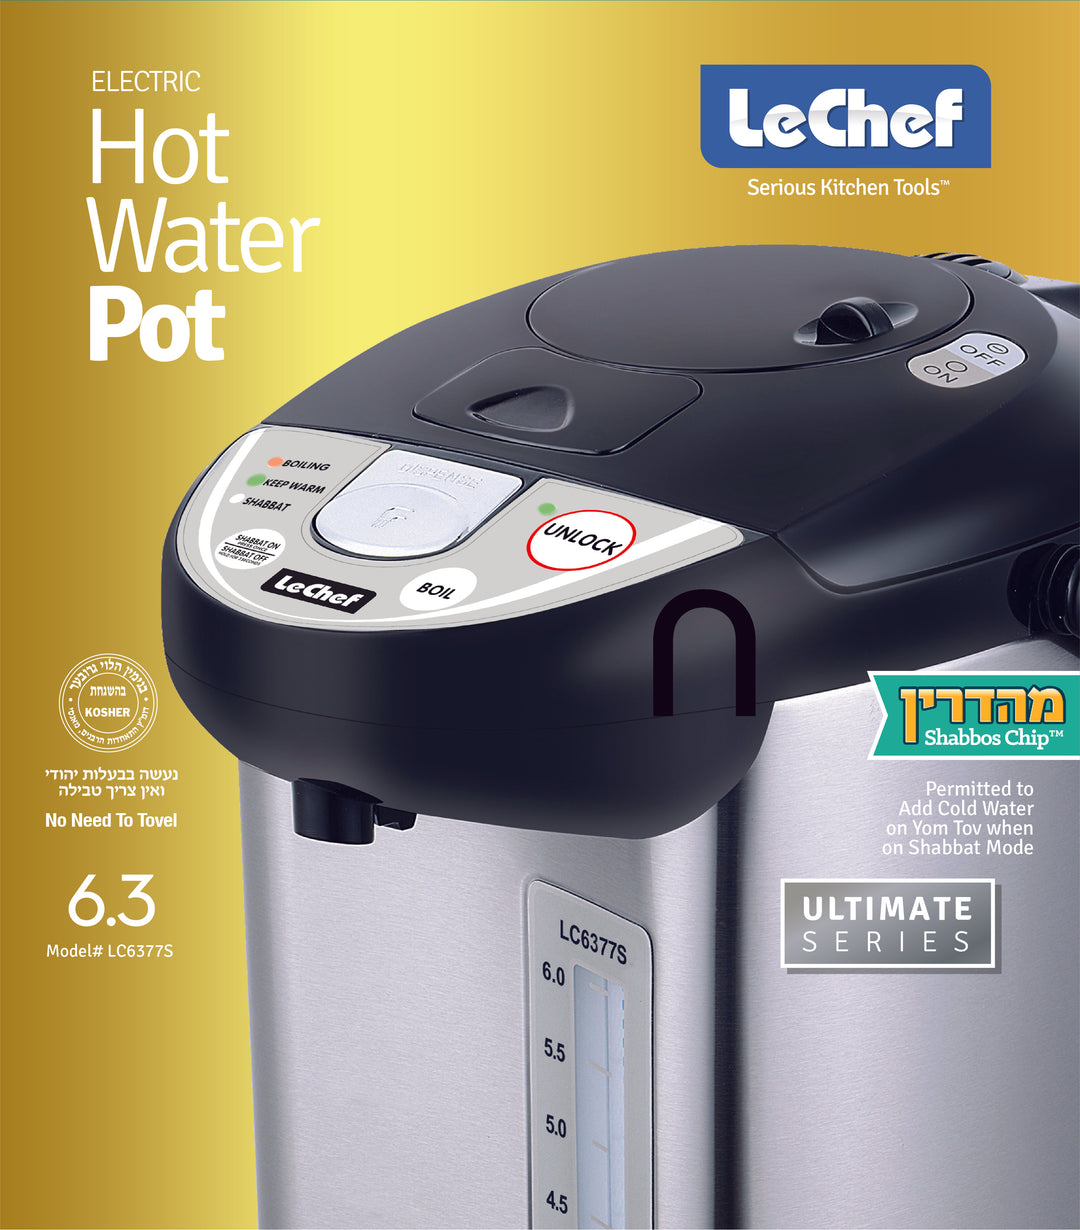 LE'CHEF ELECTRIC HOT WATER POT 6.0 QT MODEL# LC6377S WITH SHABBAT MODE